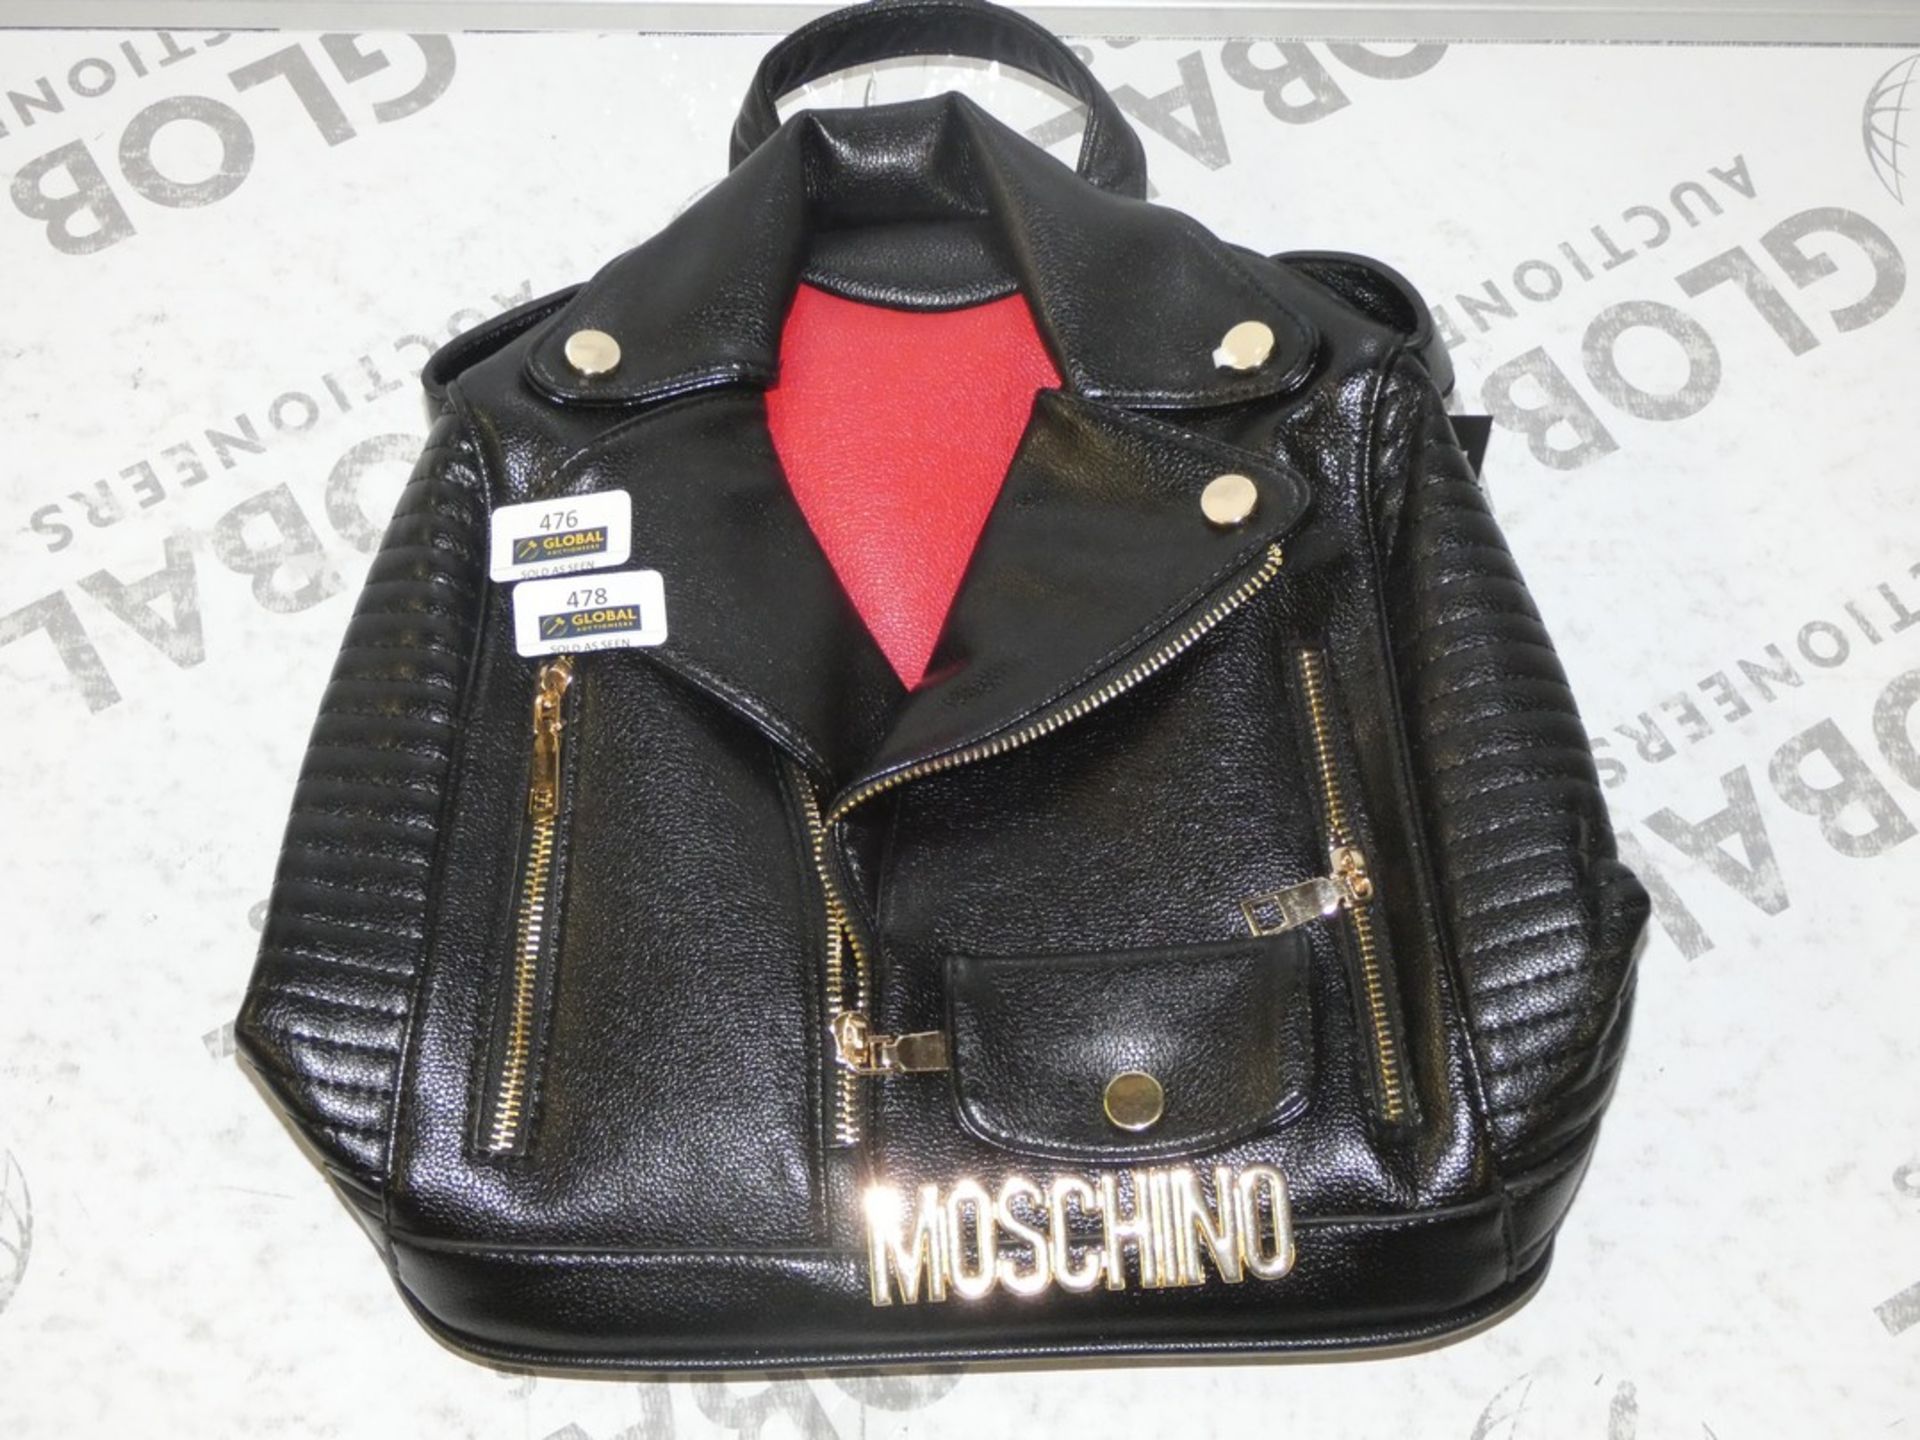 Brand New Womens Coolives Moschino Style Bag RRP £50 (Not Original Moschino)